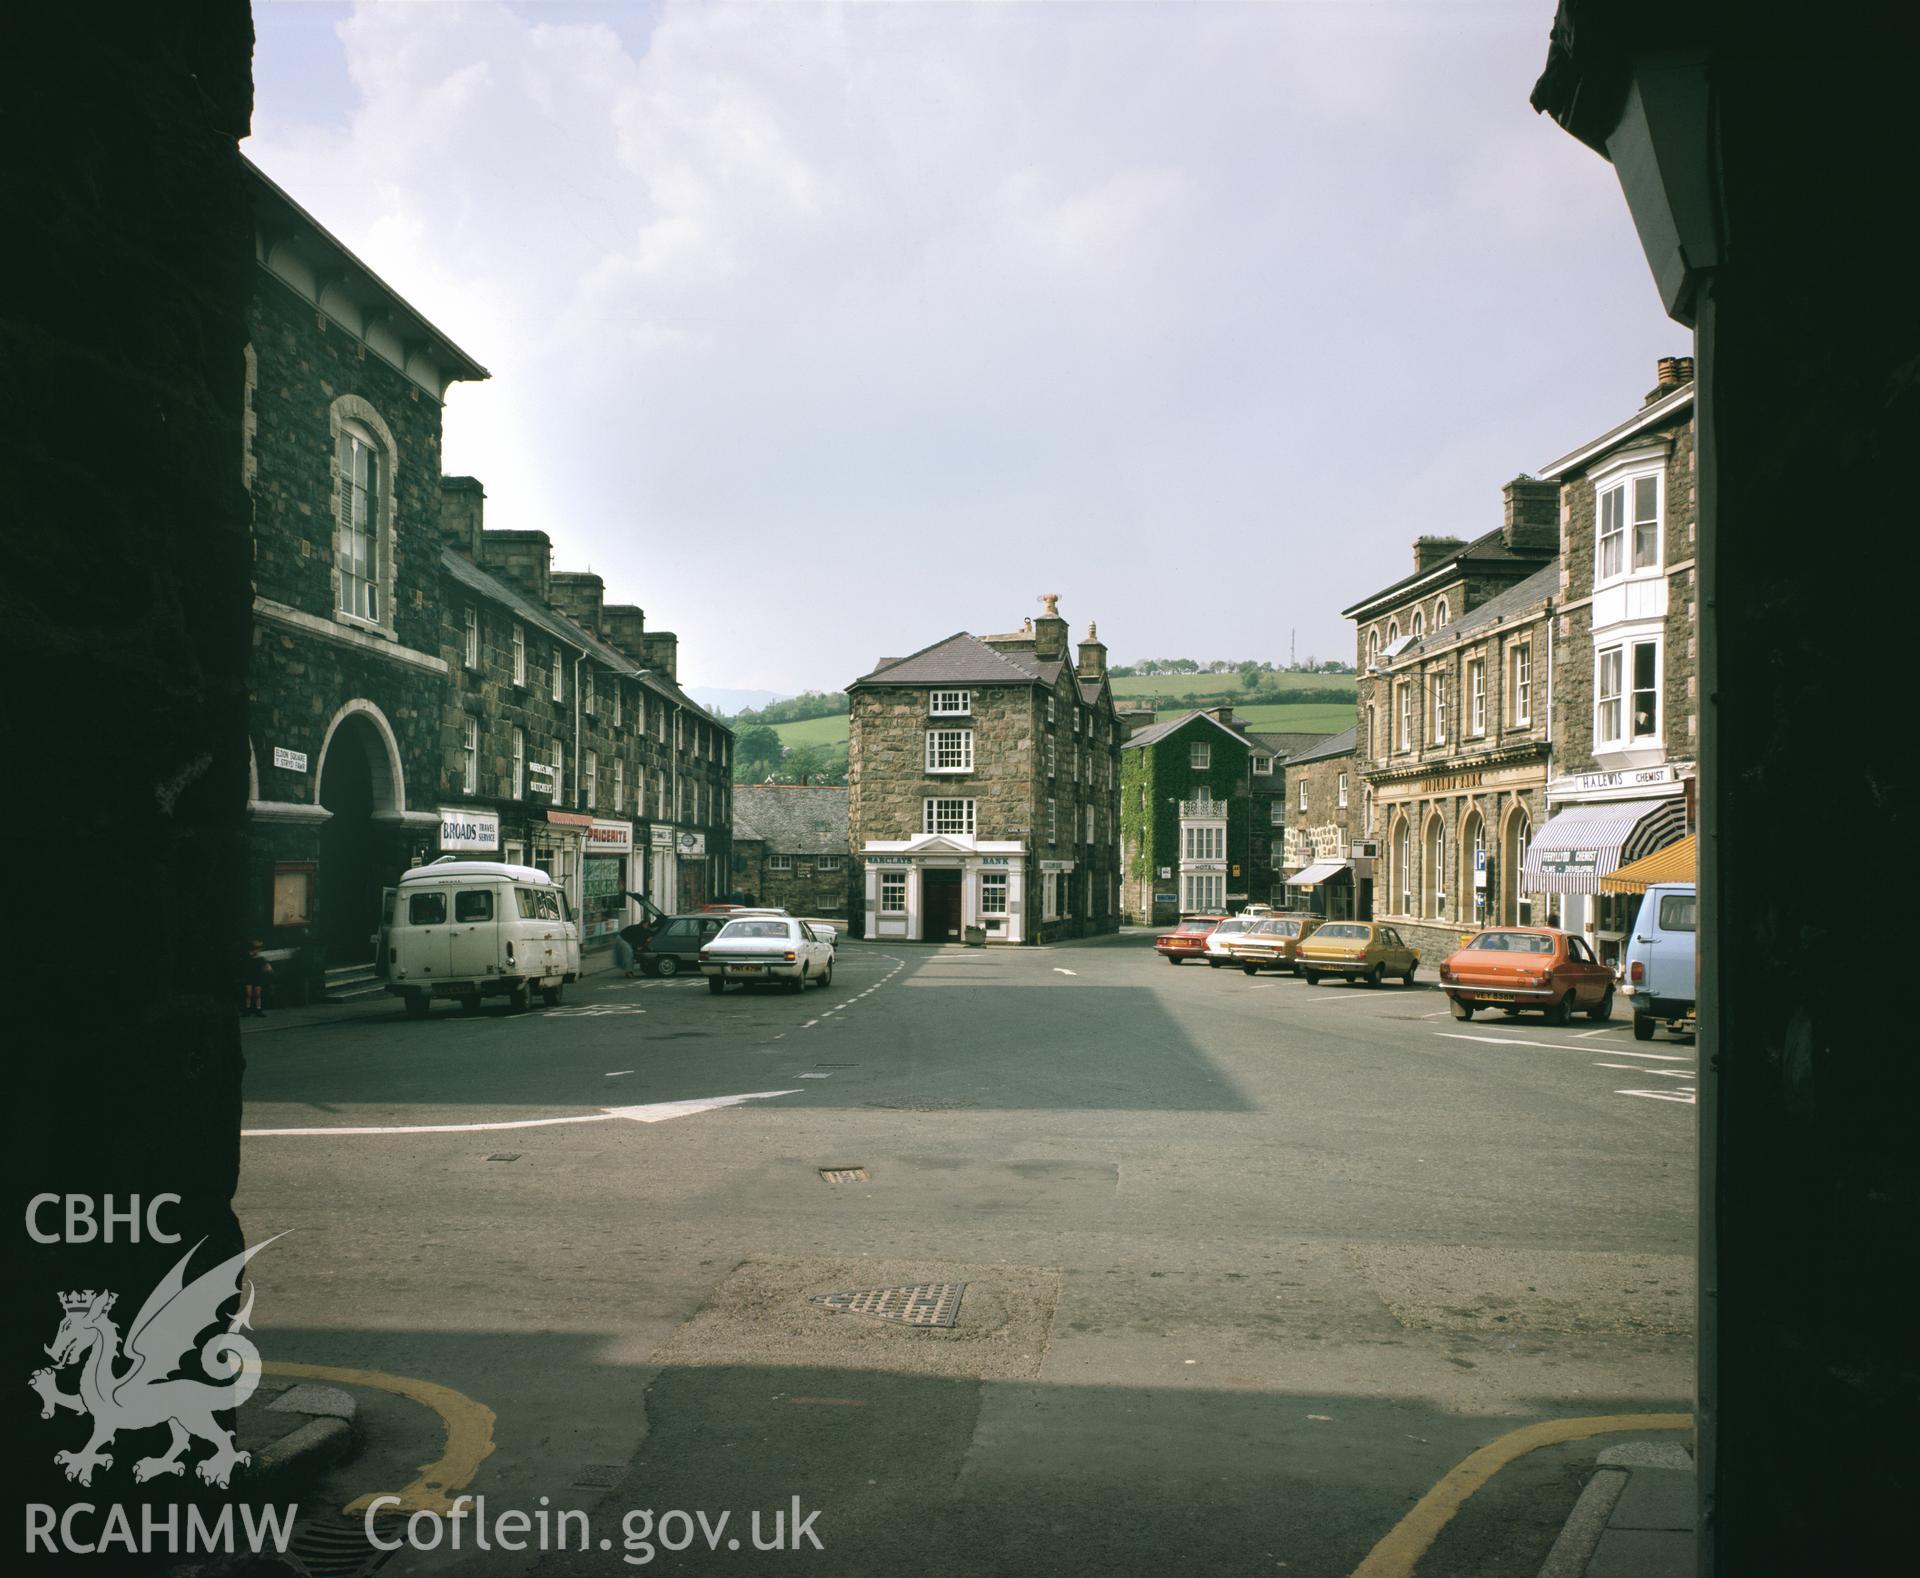 RCAHMW colour transparency showing Dolgellau town centre taken by I.N. Wright, 1979